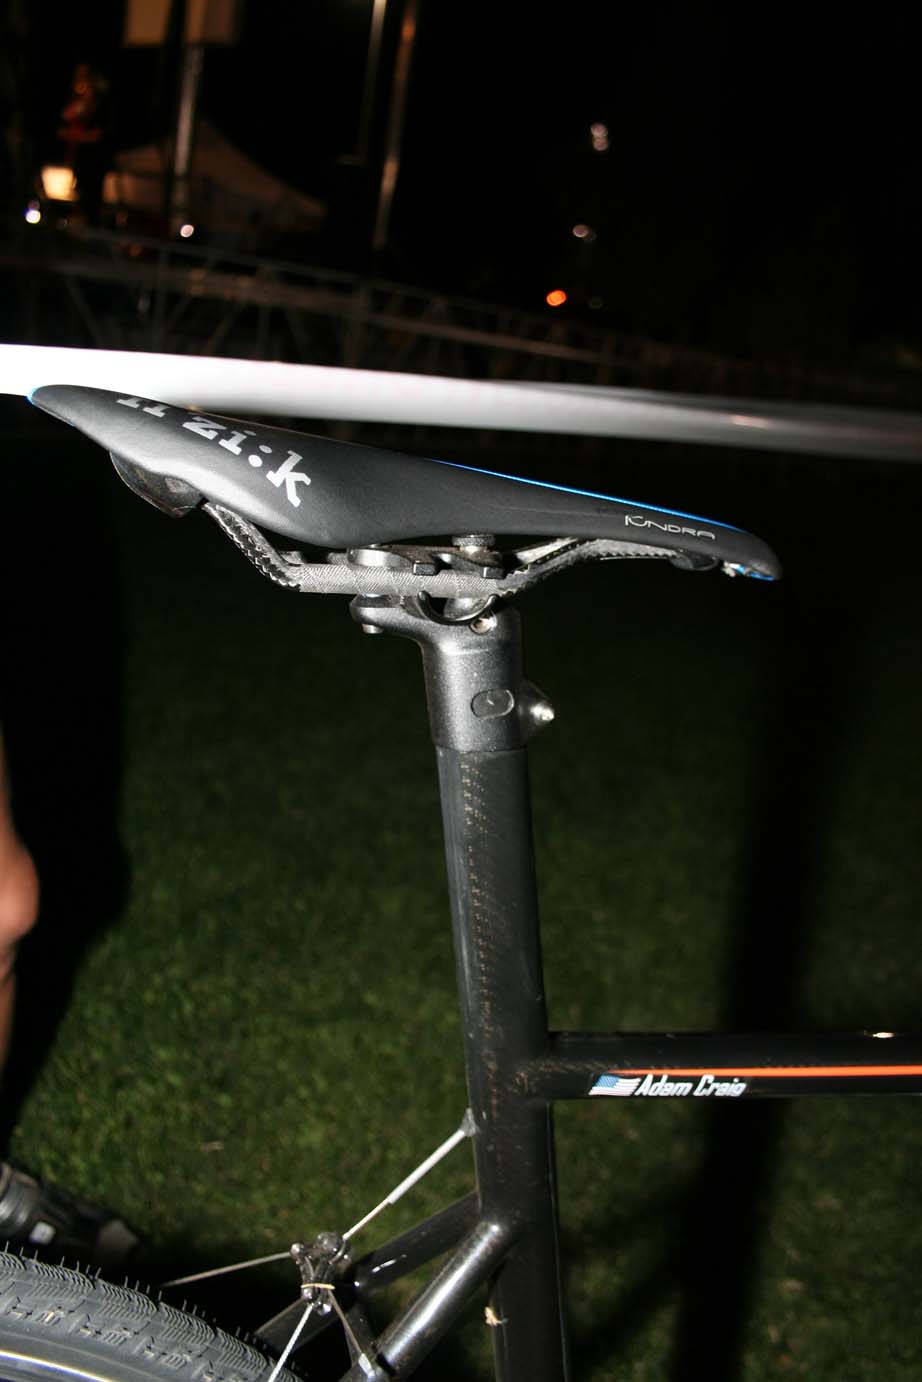 An integrated seatmast is becoming a more and more common sighting. by Andrew Yee